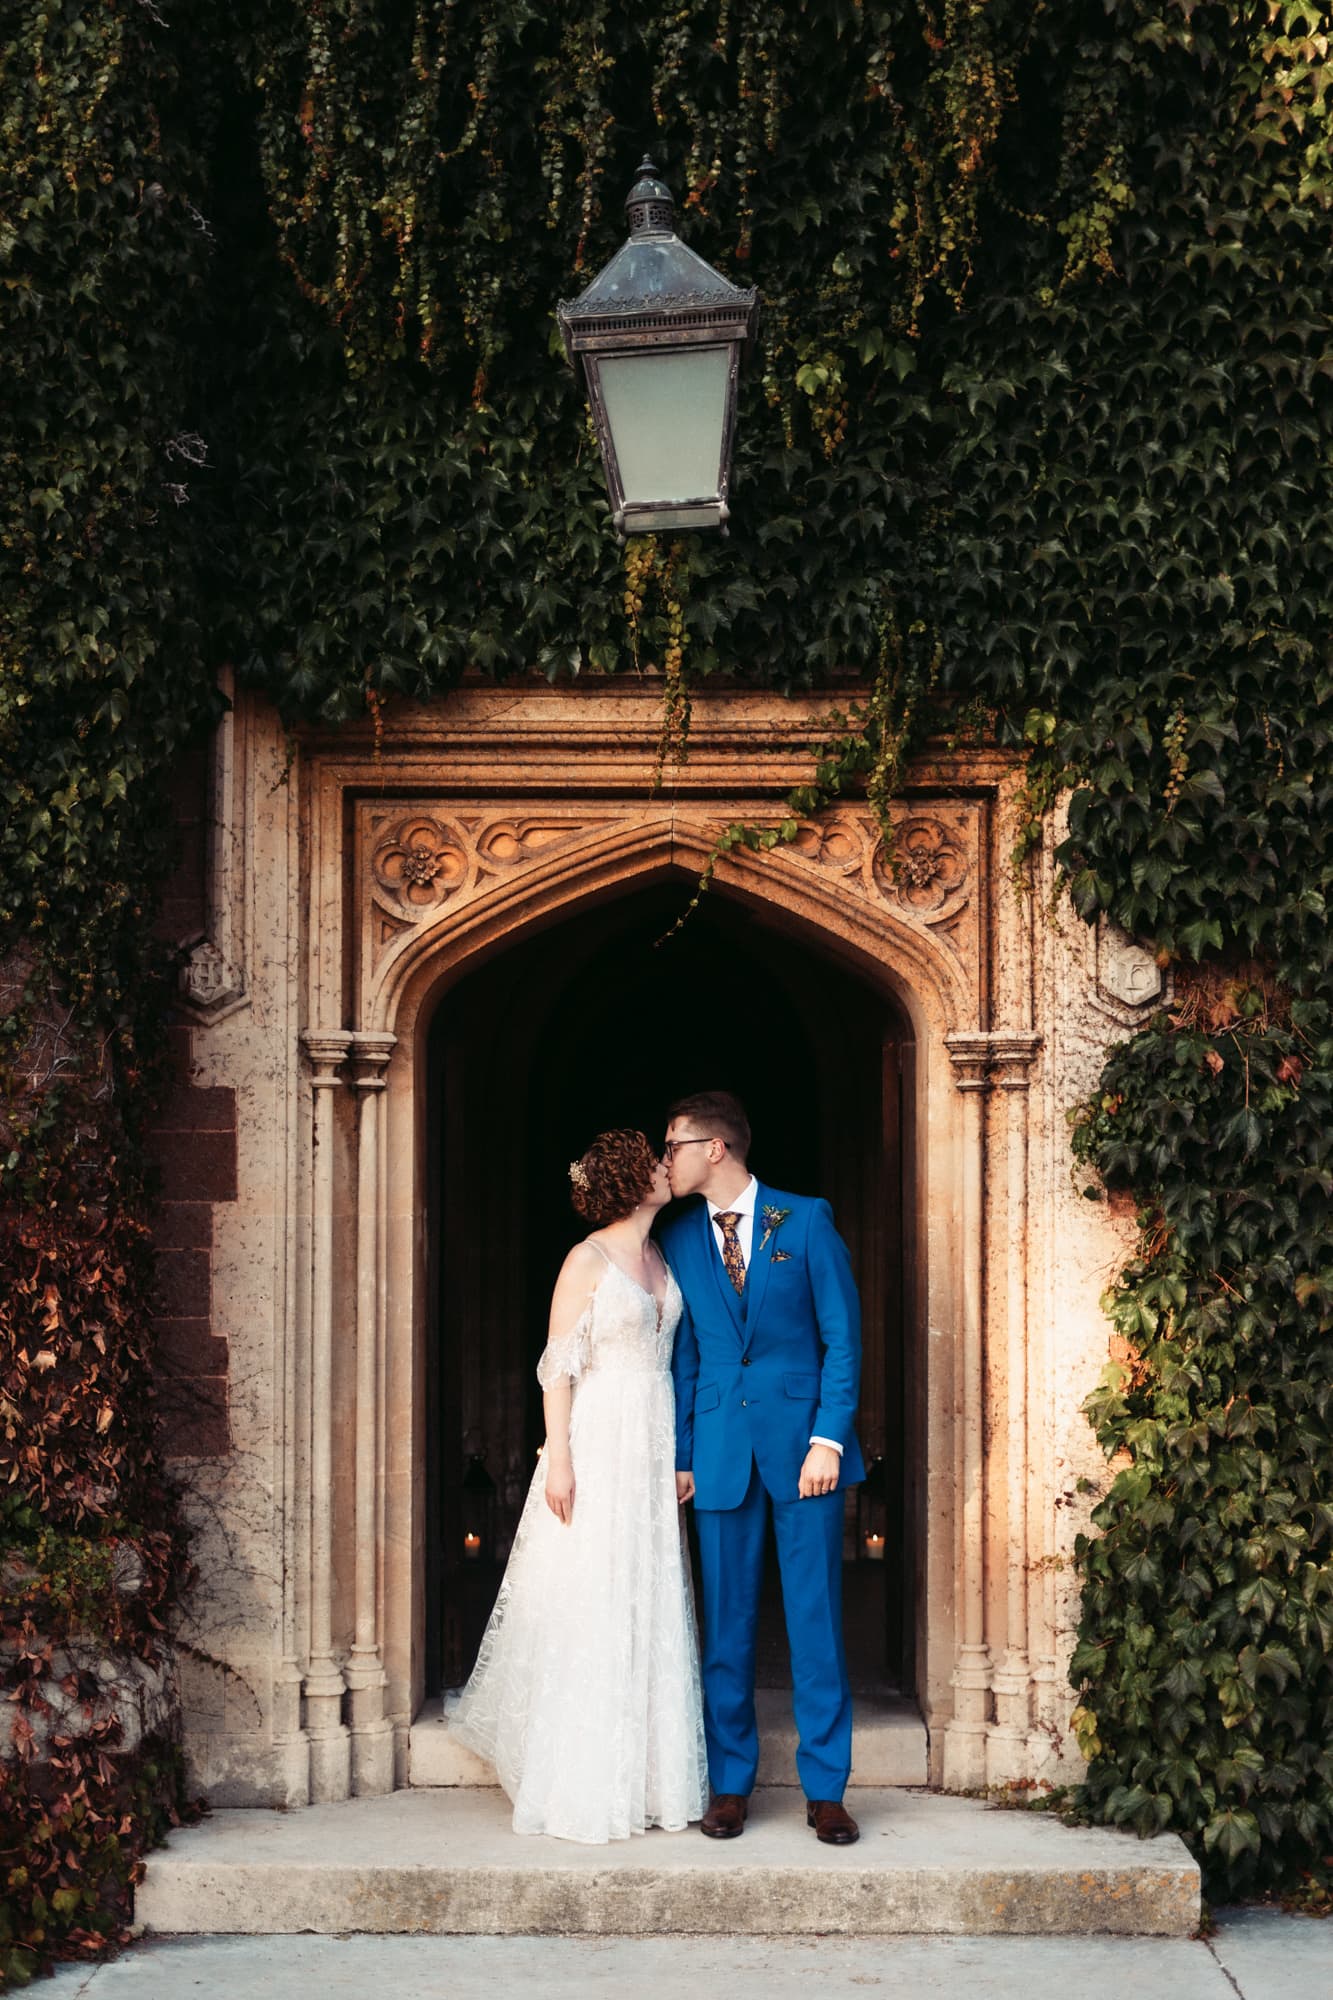 Wedding Photography at St Audries Park Wildly in Love